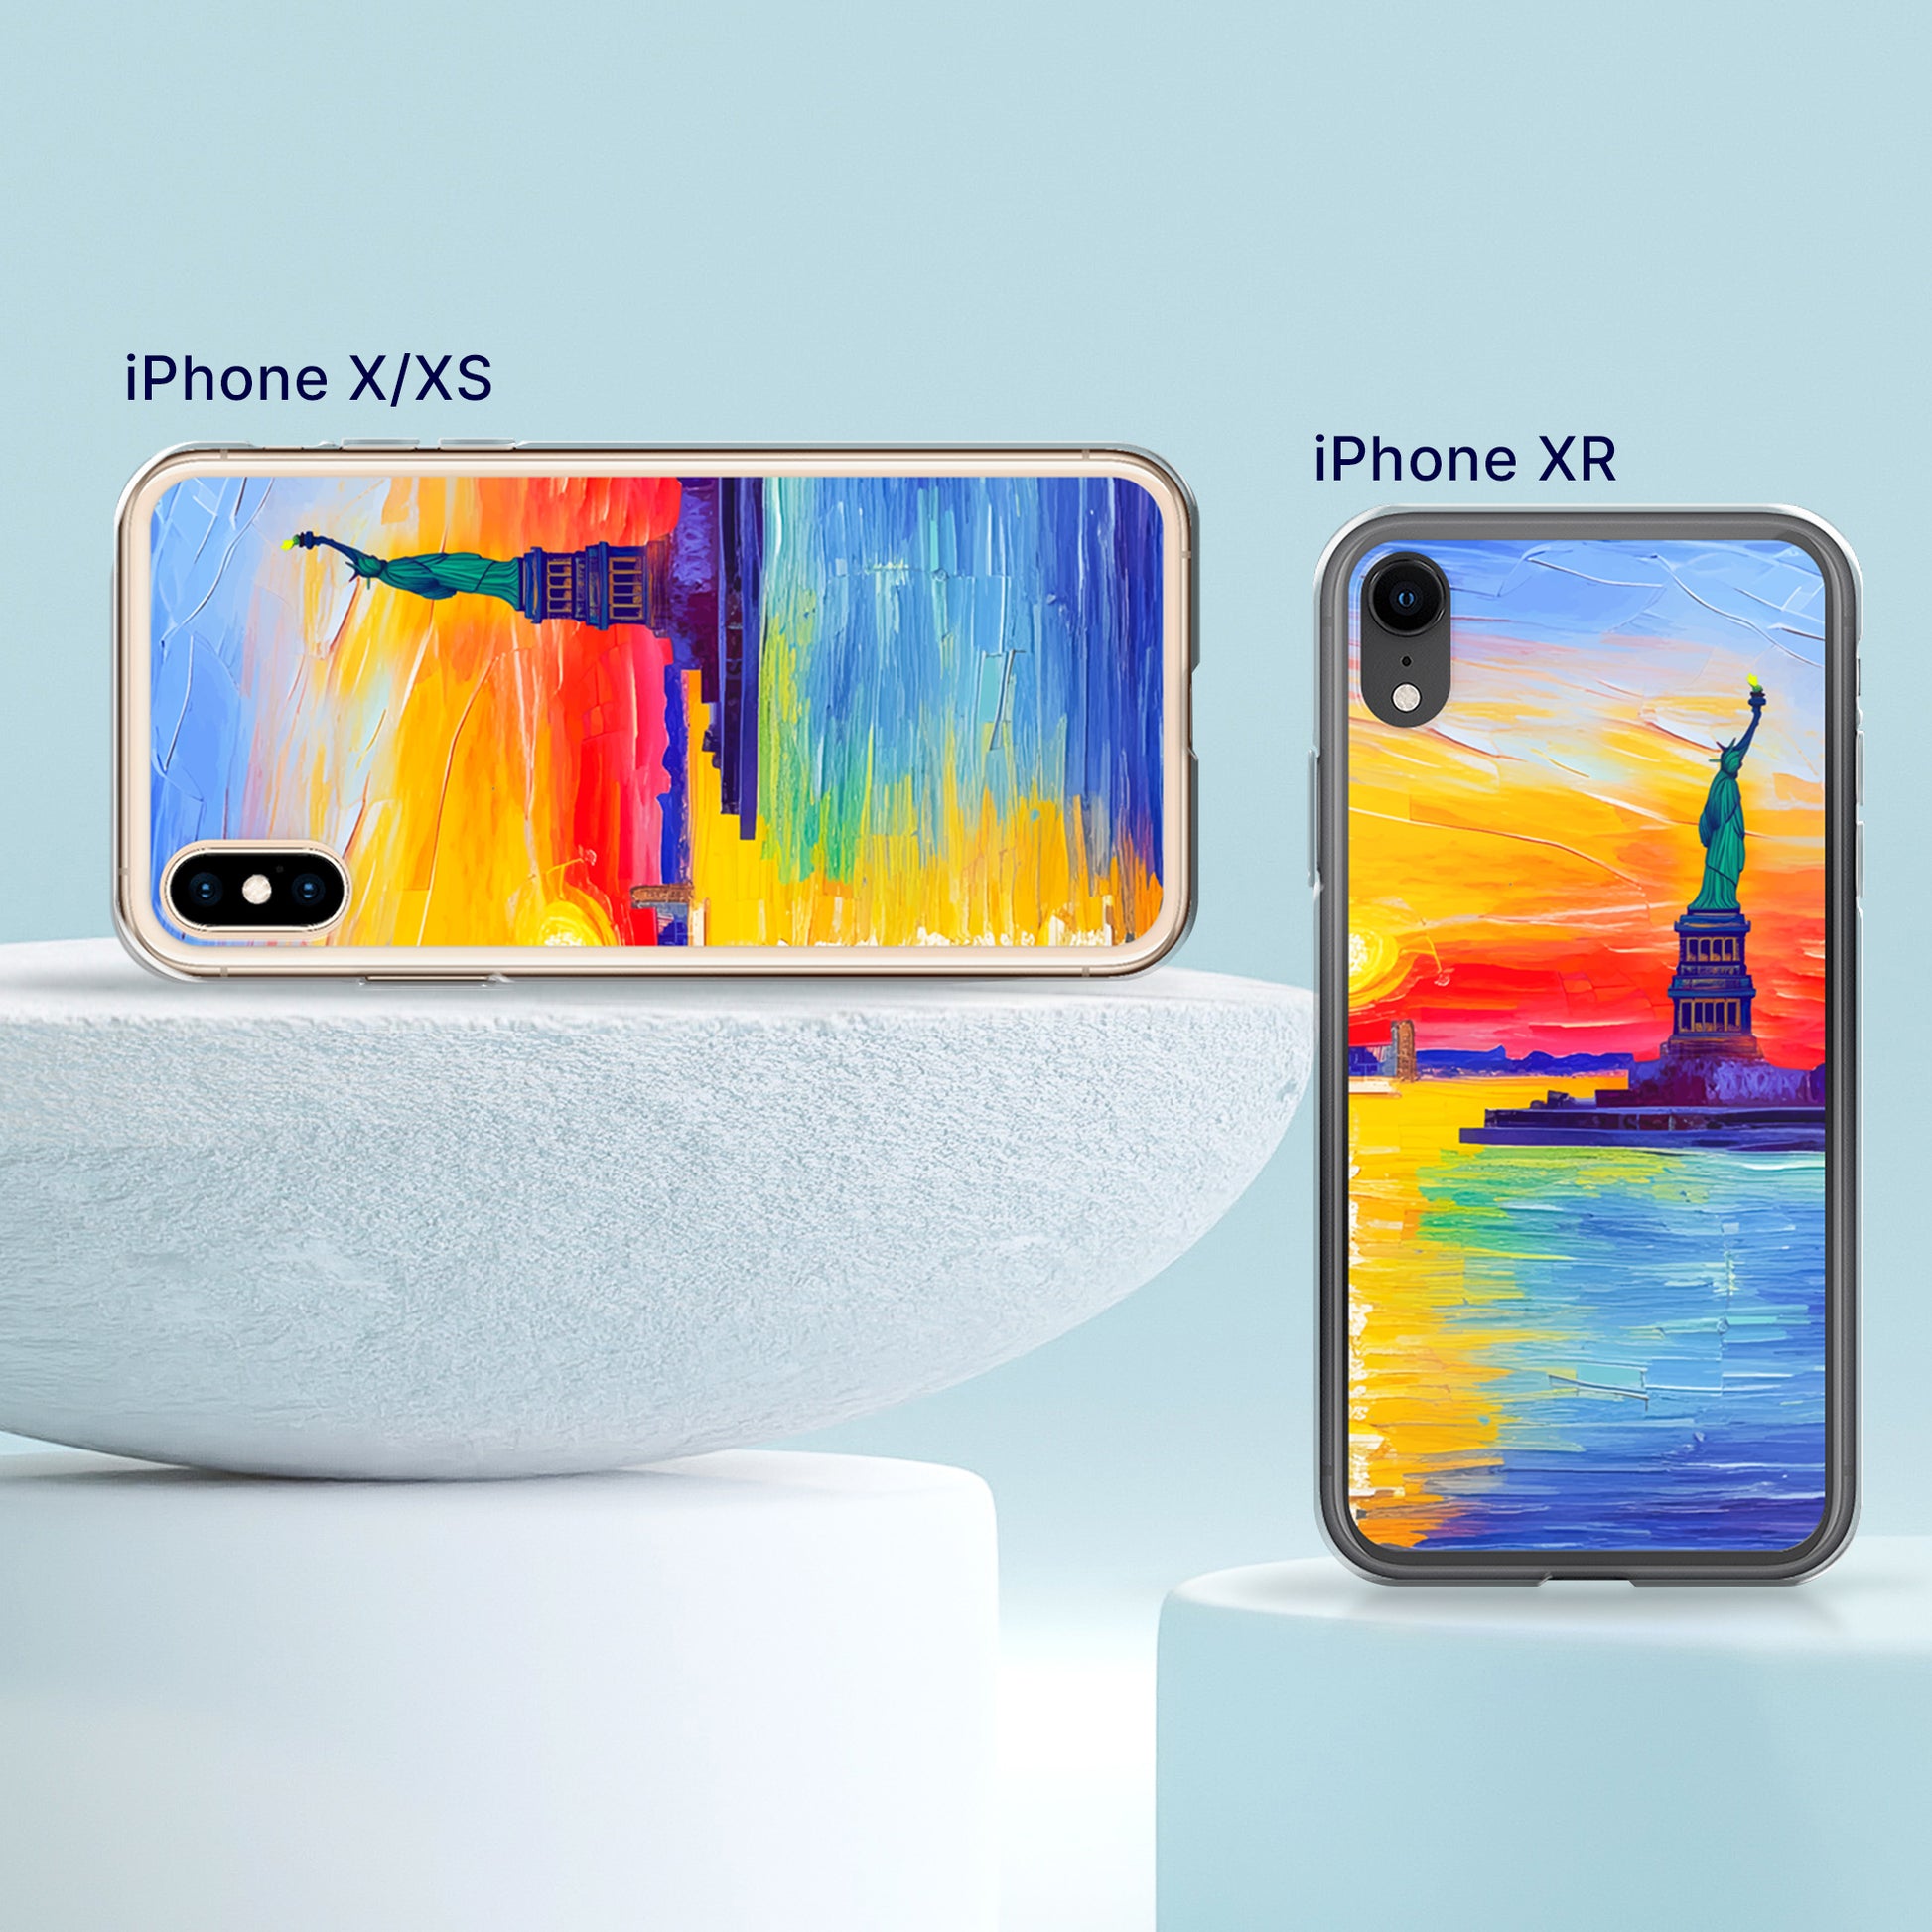 Fashionable iPhone Case with cityscape painting - New York| Seepu | X/XS, XR